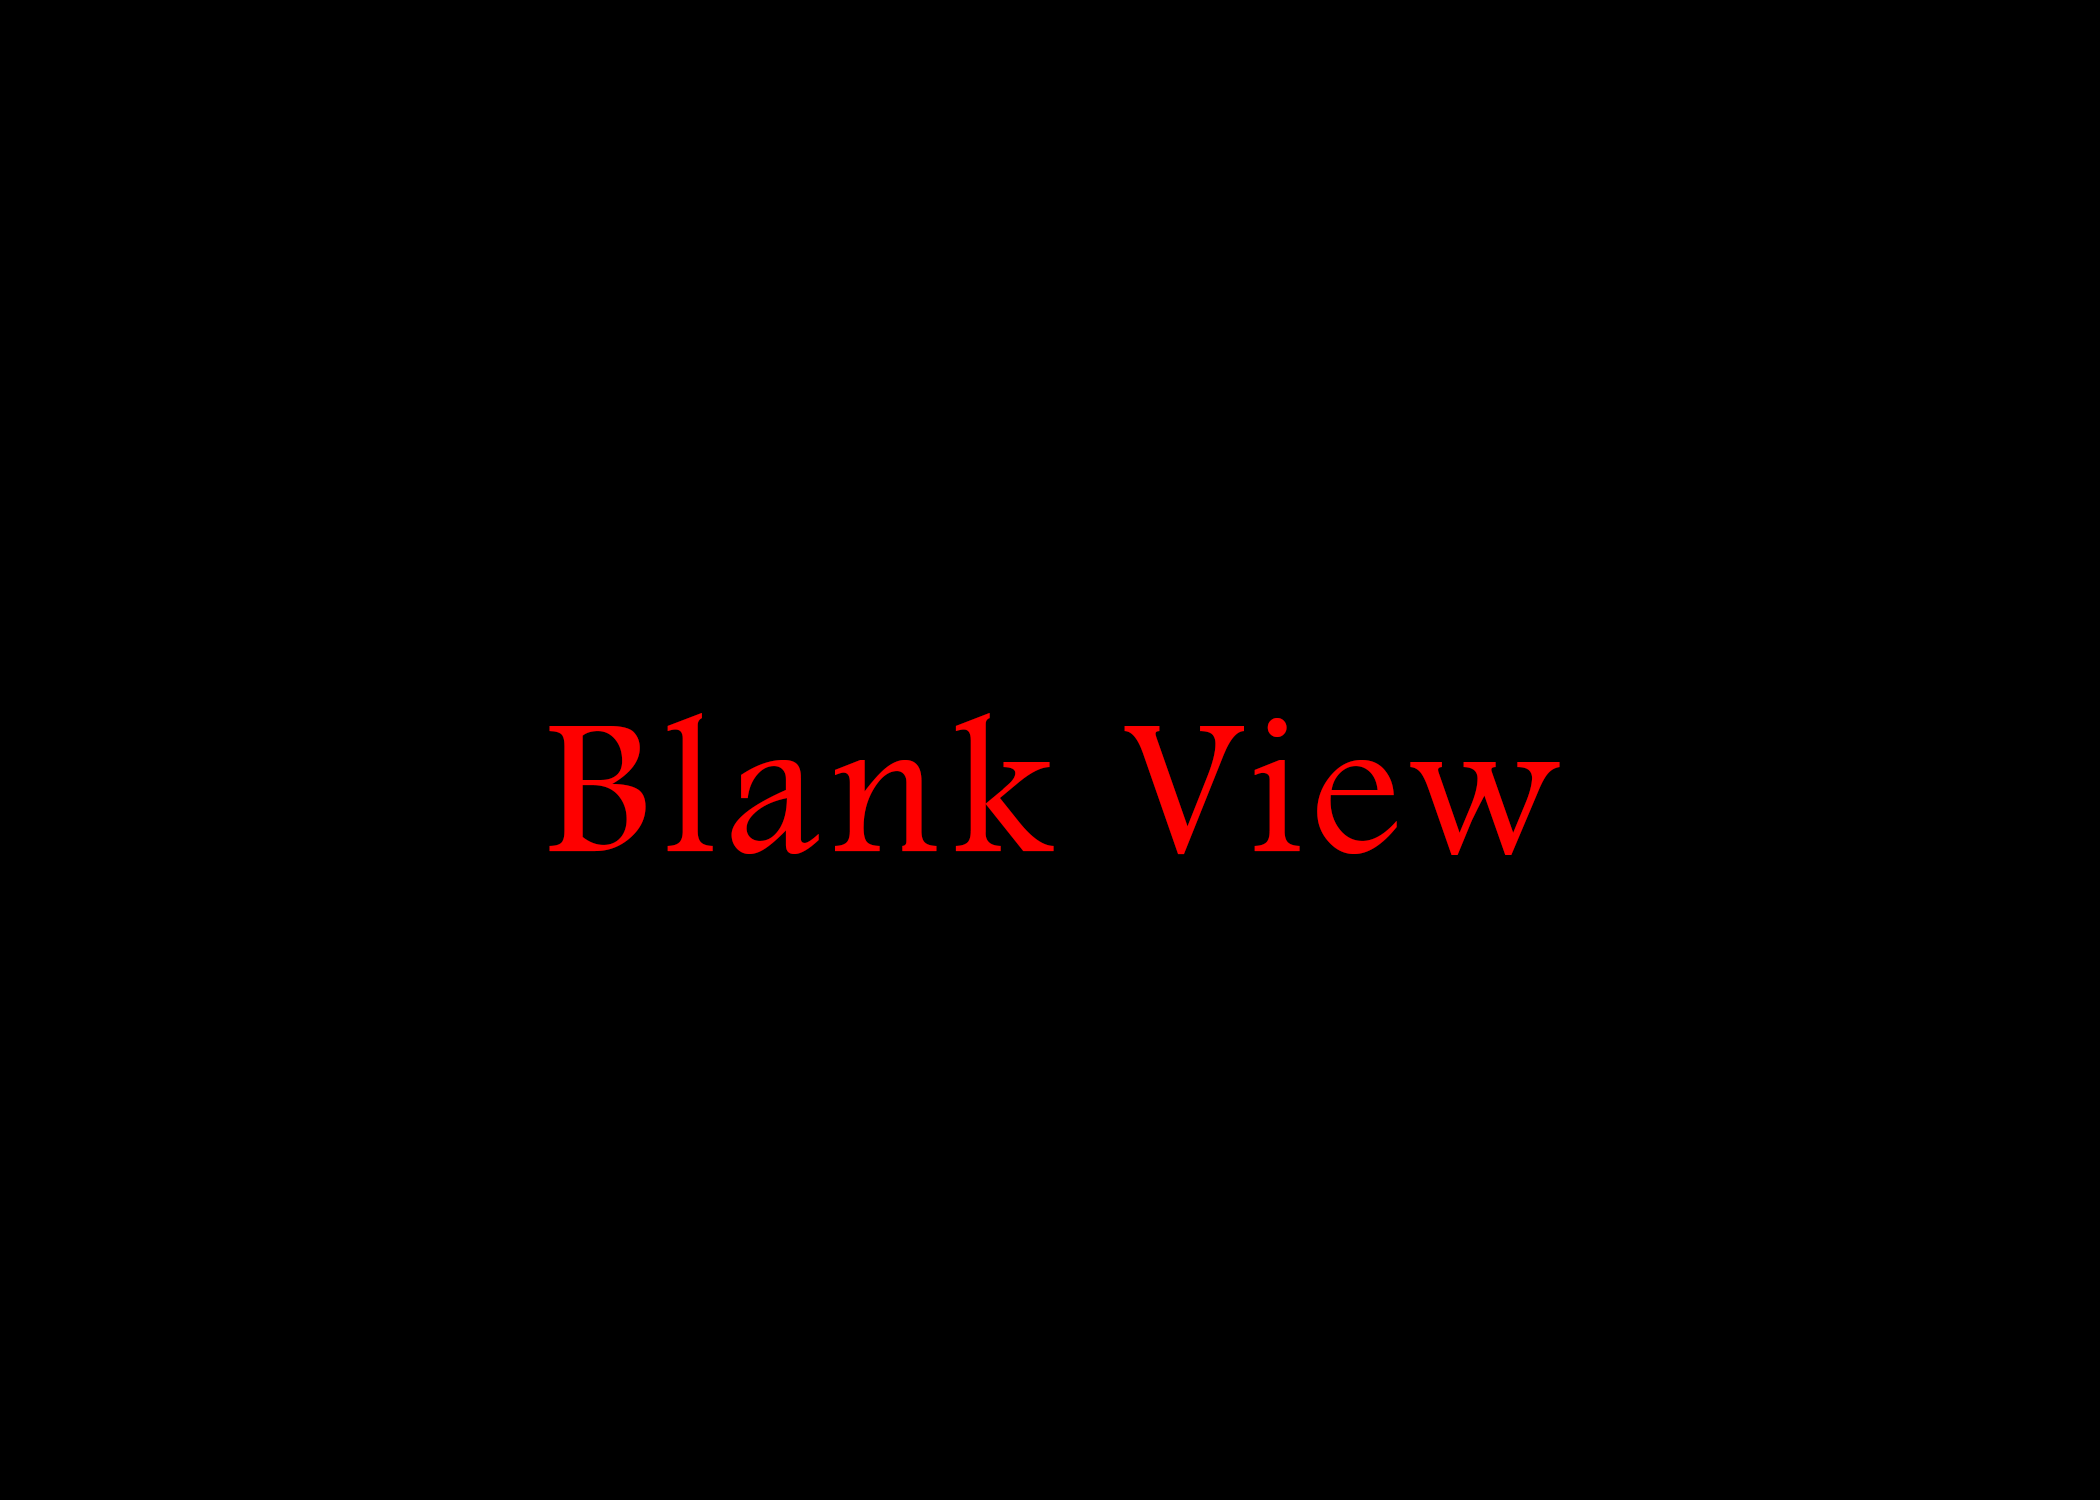 Blank View